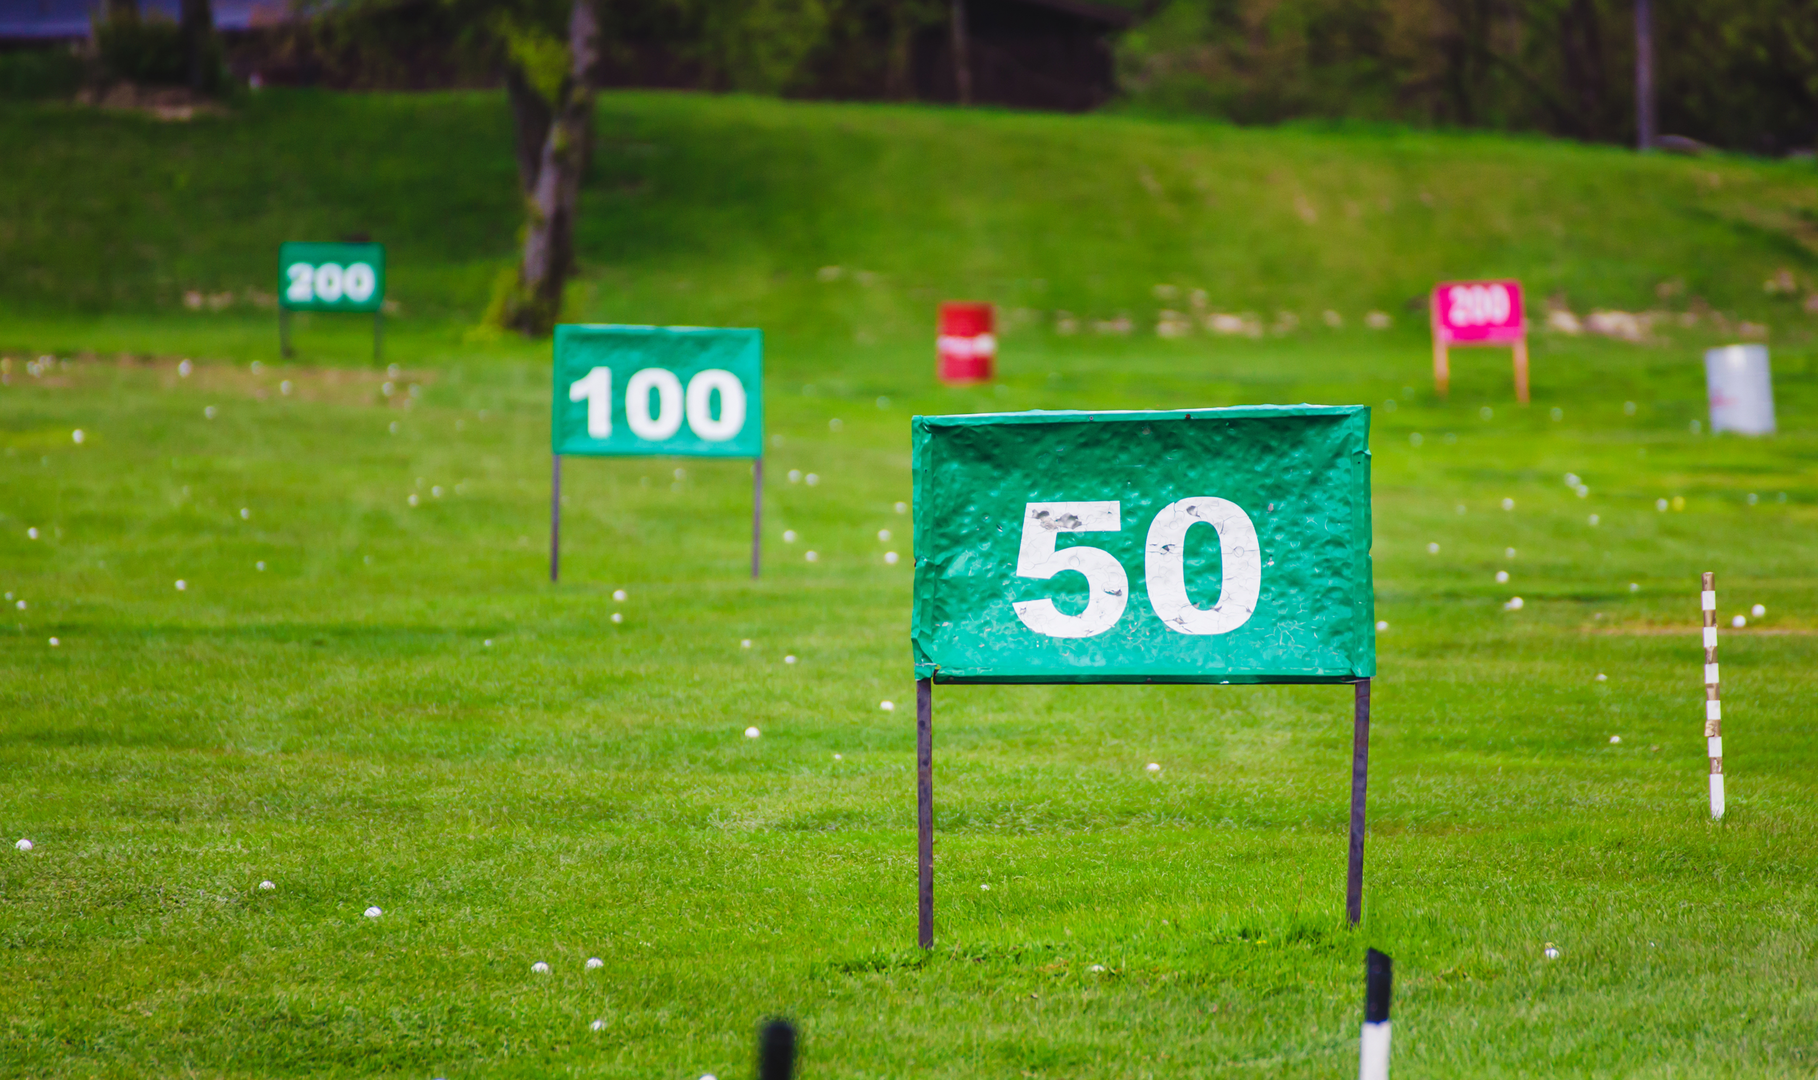 Distance markers laid out on a driving range with golf balls strewn across the grass